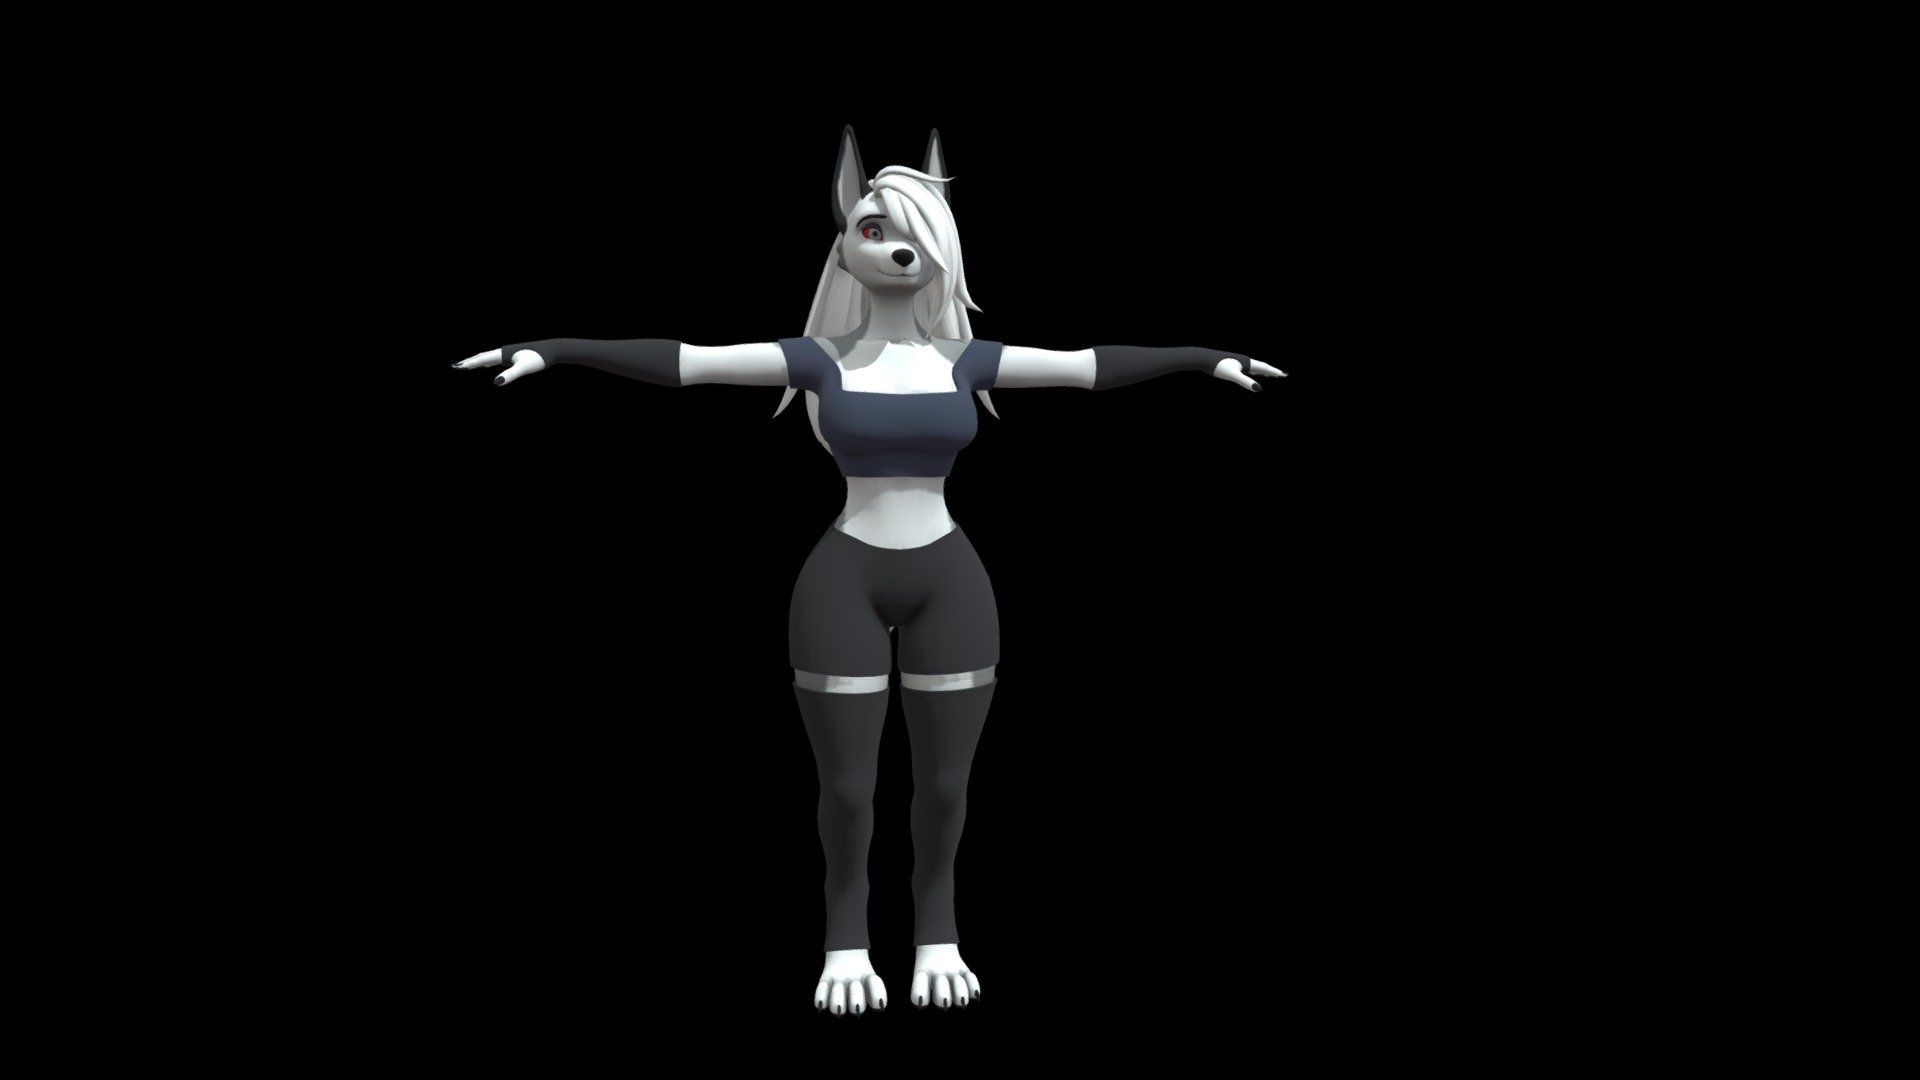 Loona [vrchat] 3d Model By Gonzalo Marquez Shadowcarmesi [c3970bc